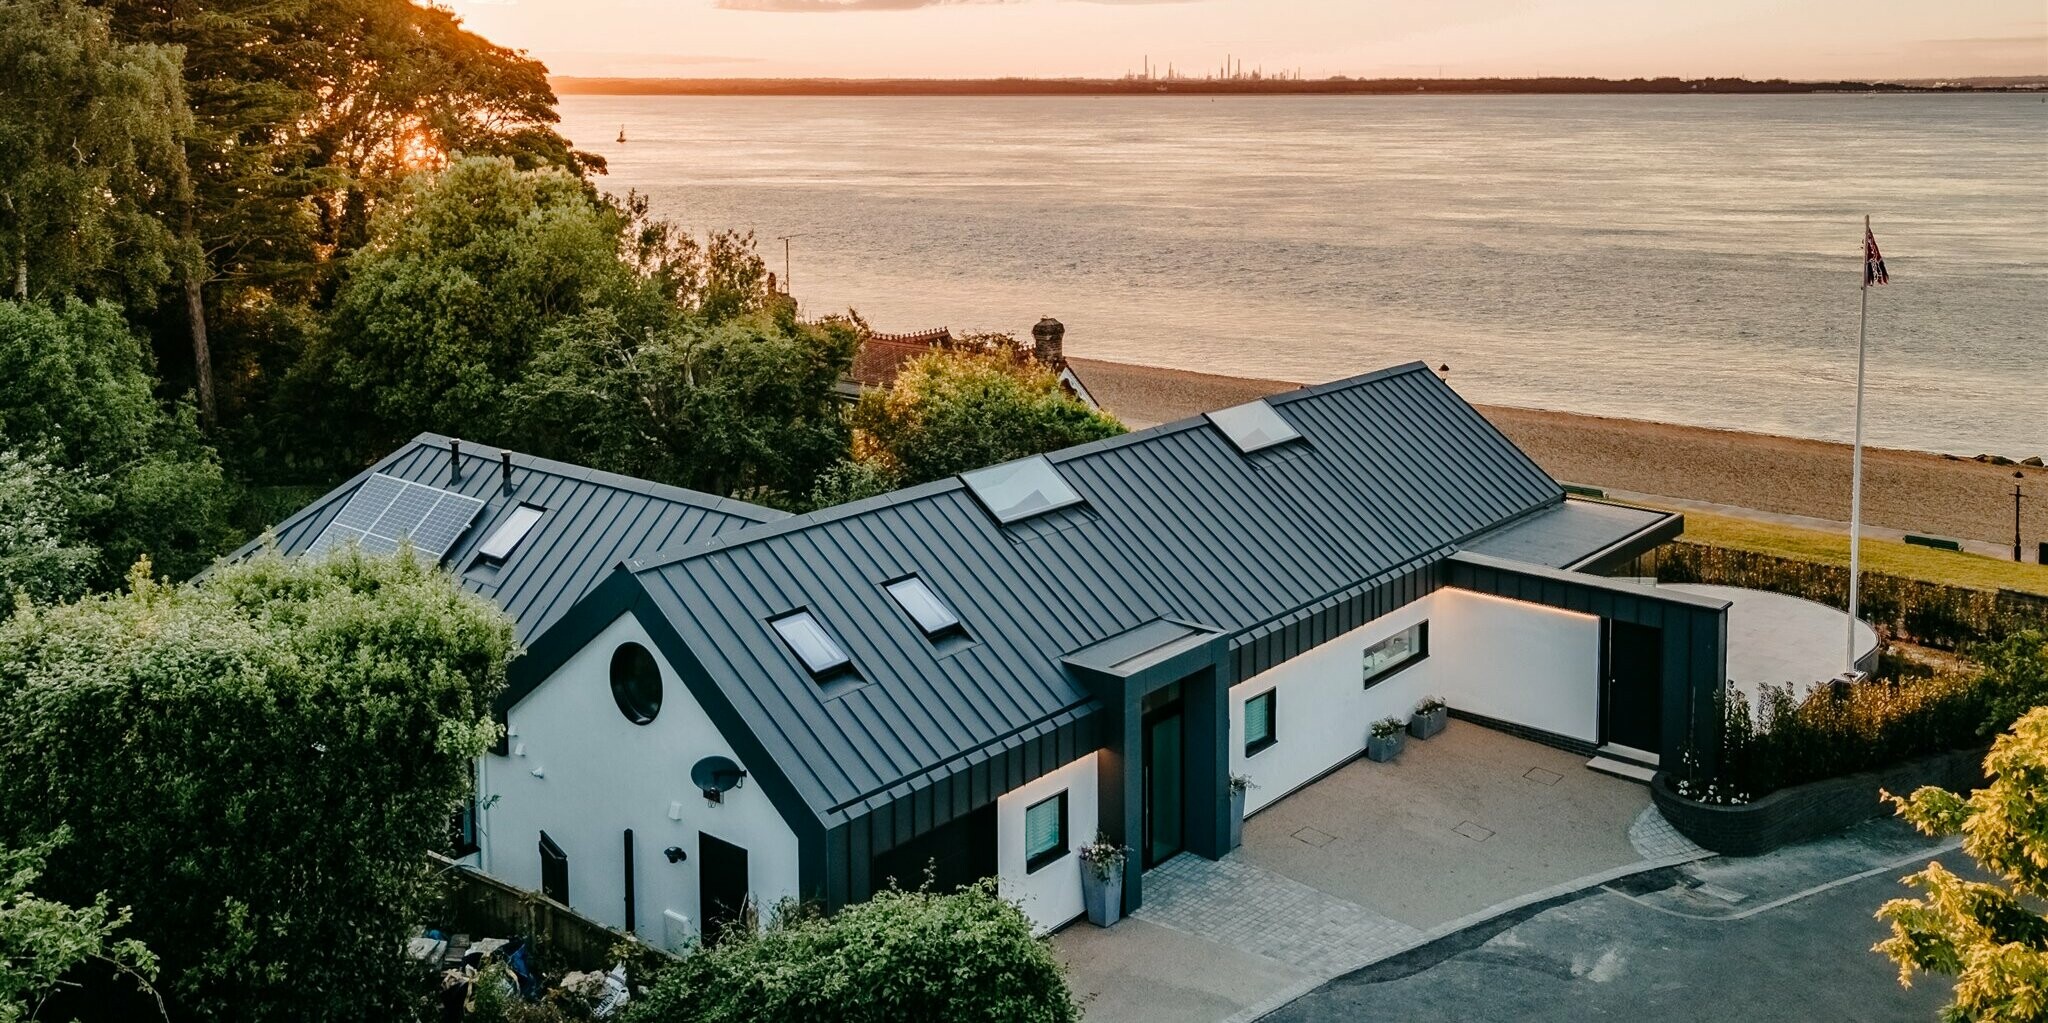 Bungalow on Isle of Wight from birds eye view to the sea, roofed with PREFA PREFALZ in P.10 dark grey.